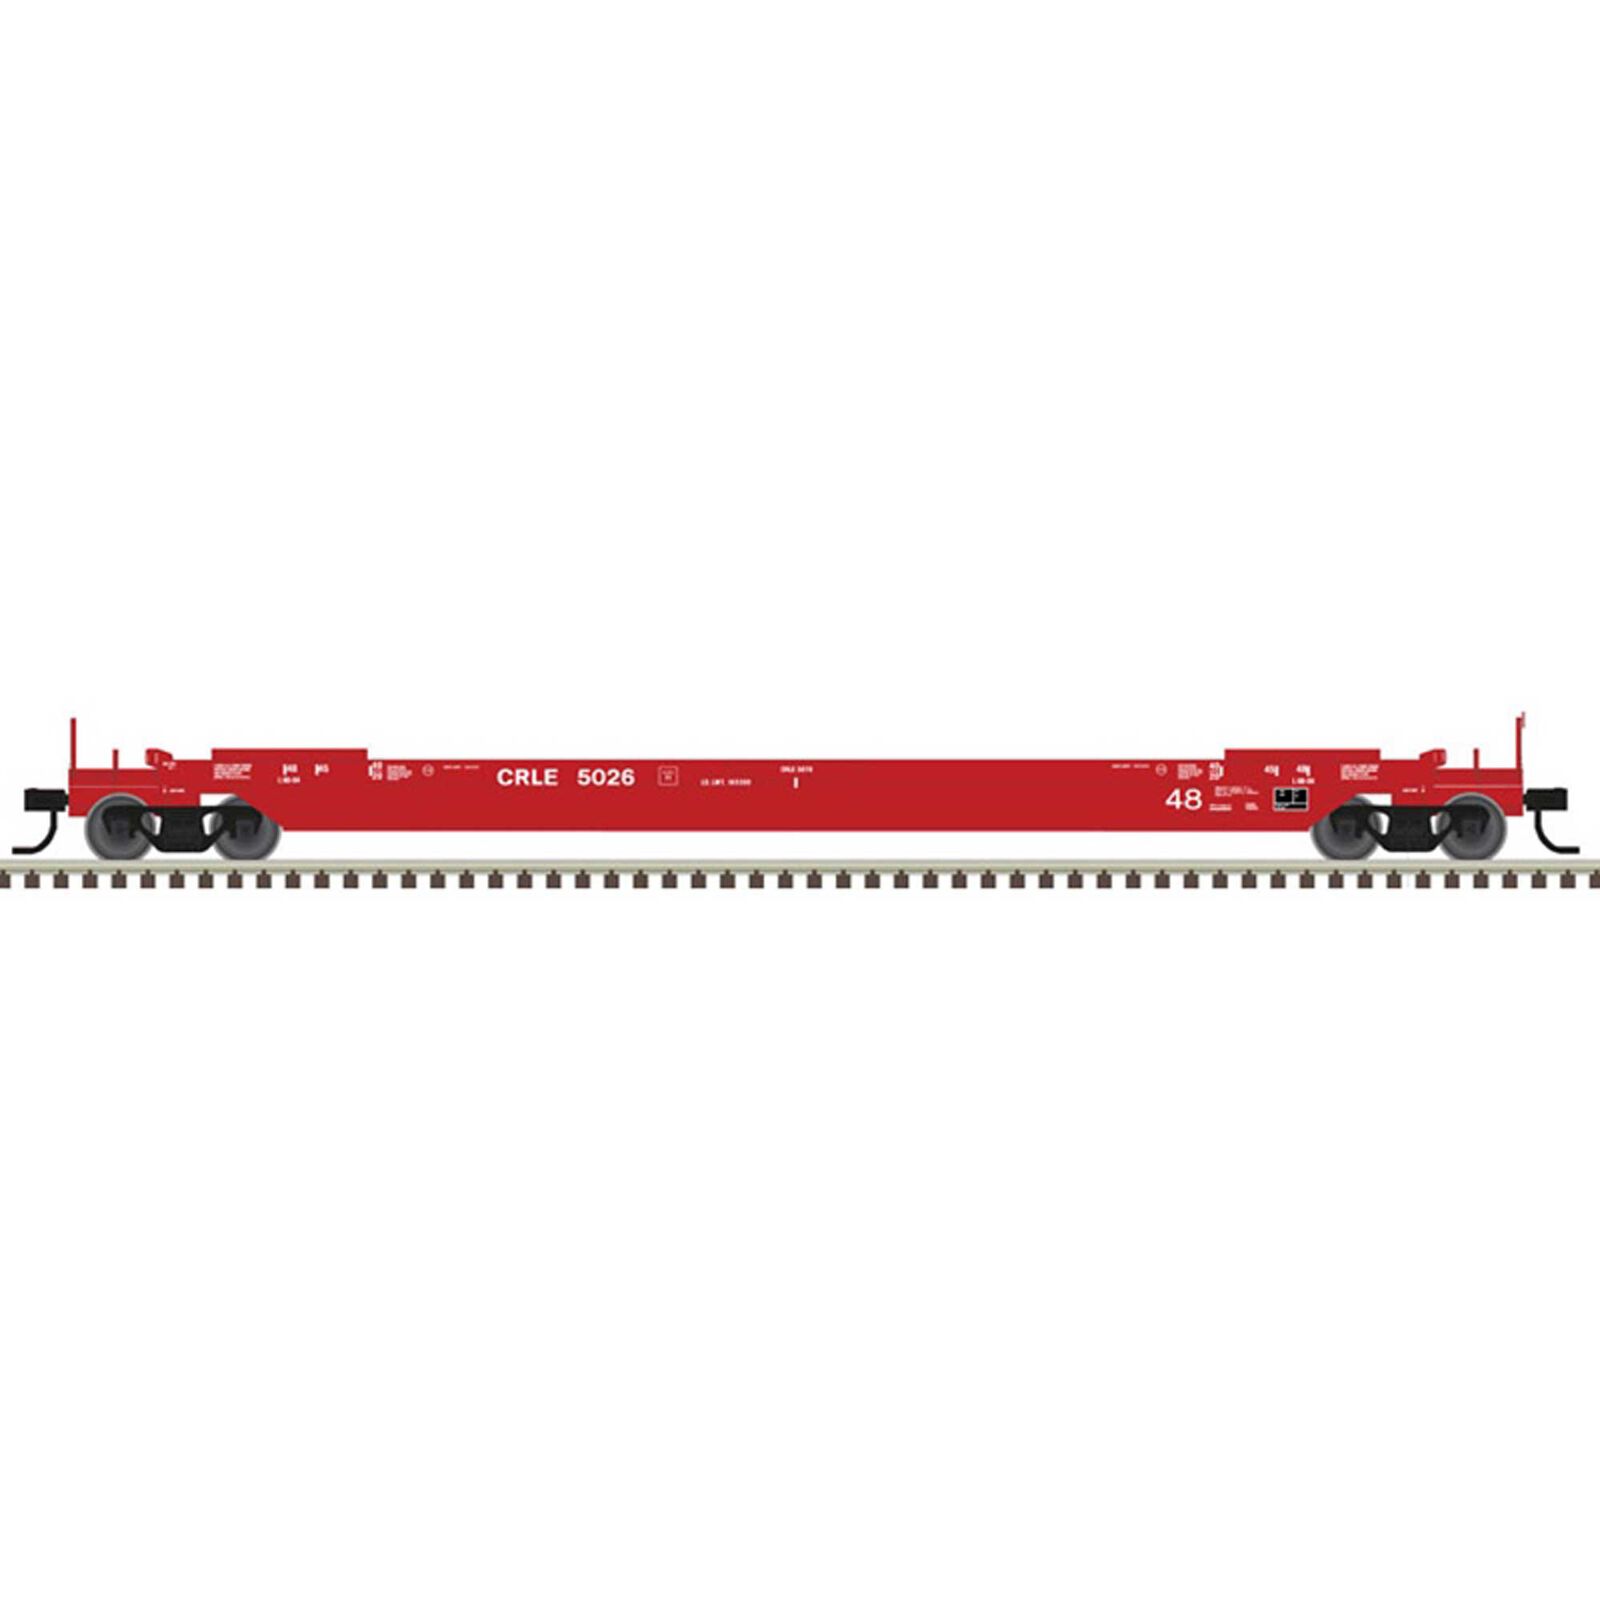 HO 48' All Purpose Well Car CRLE #5047, Red/White